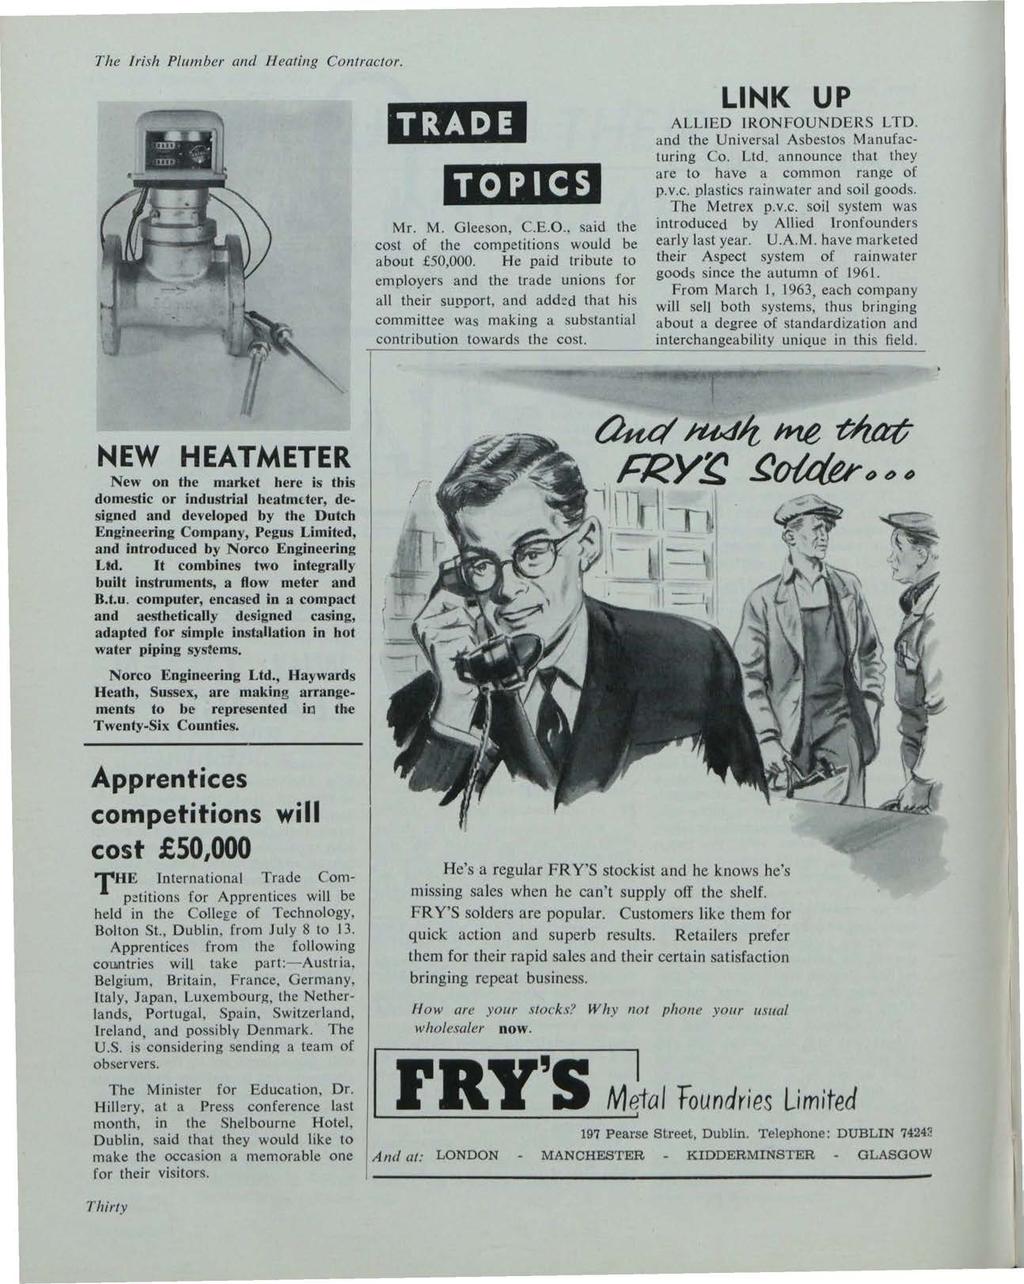 Building Services News, Vol. 2, Iss. 12 [1963], Art. 1 The Irish Plumber and Heating Contractor. TRADE TOPICS Mr. M. Gleeson, C.E.O., said the cost of the competitions would be about 50,000.